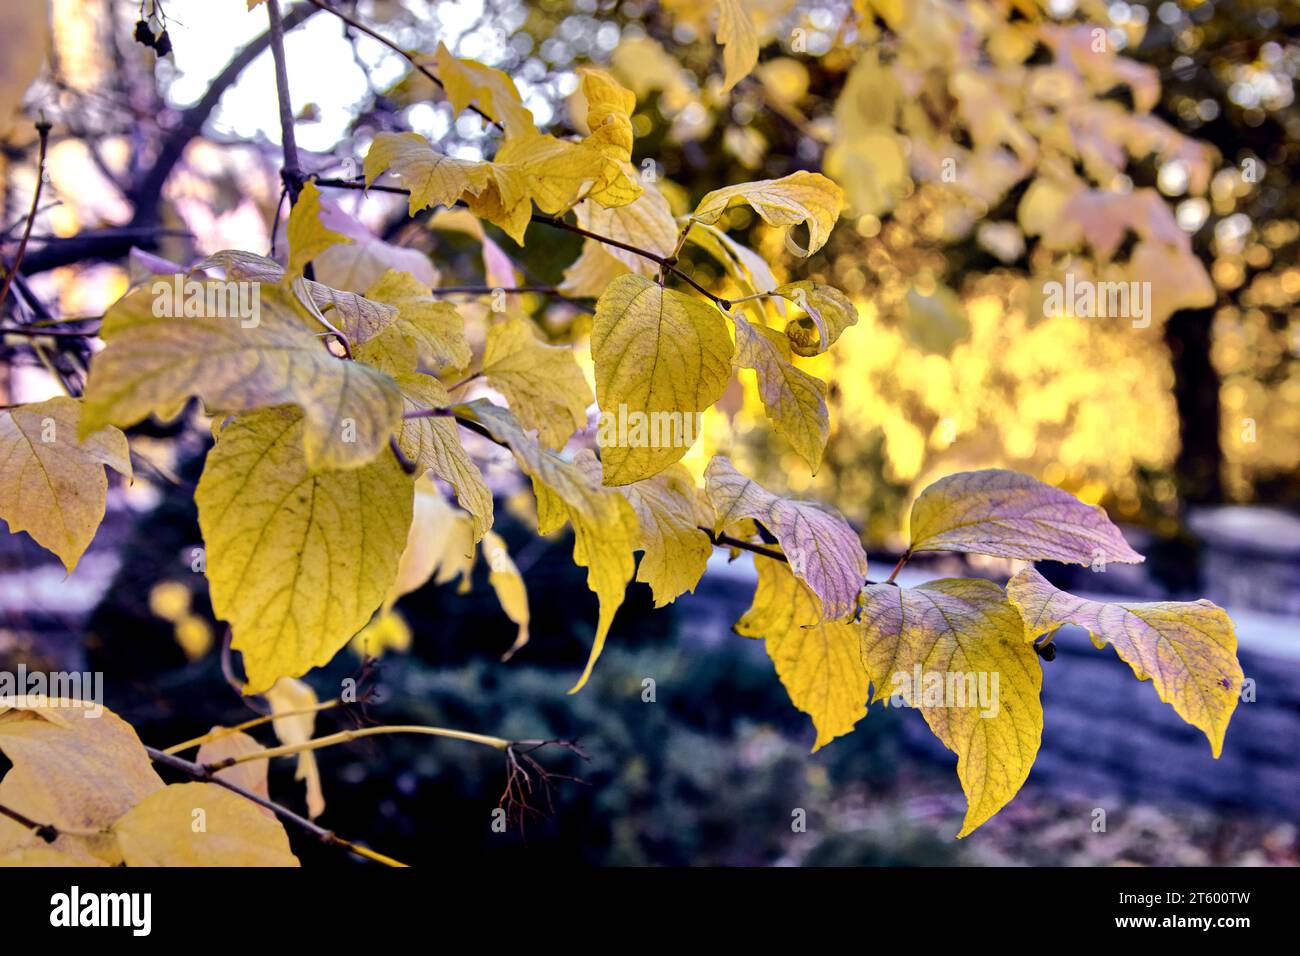 Image of a twig with yellow leaves against the background of a park Stock Photo